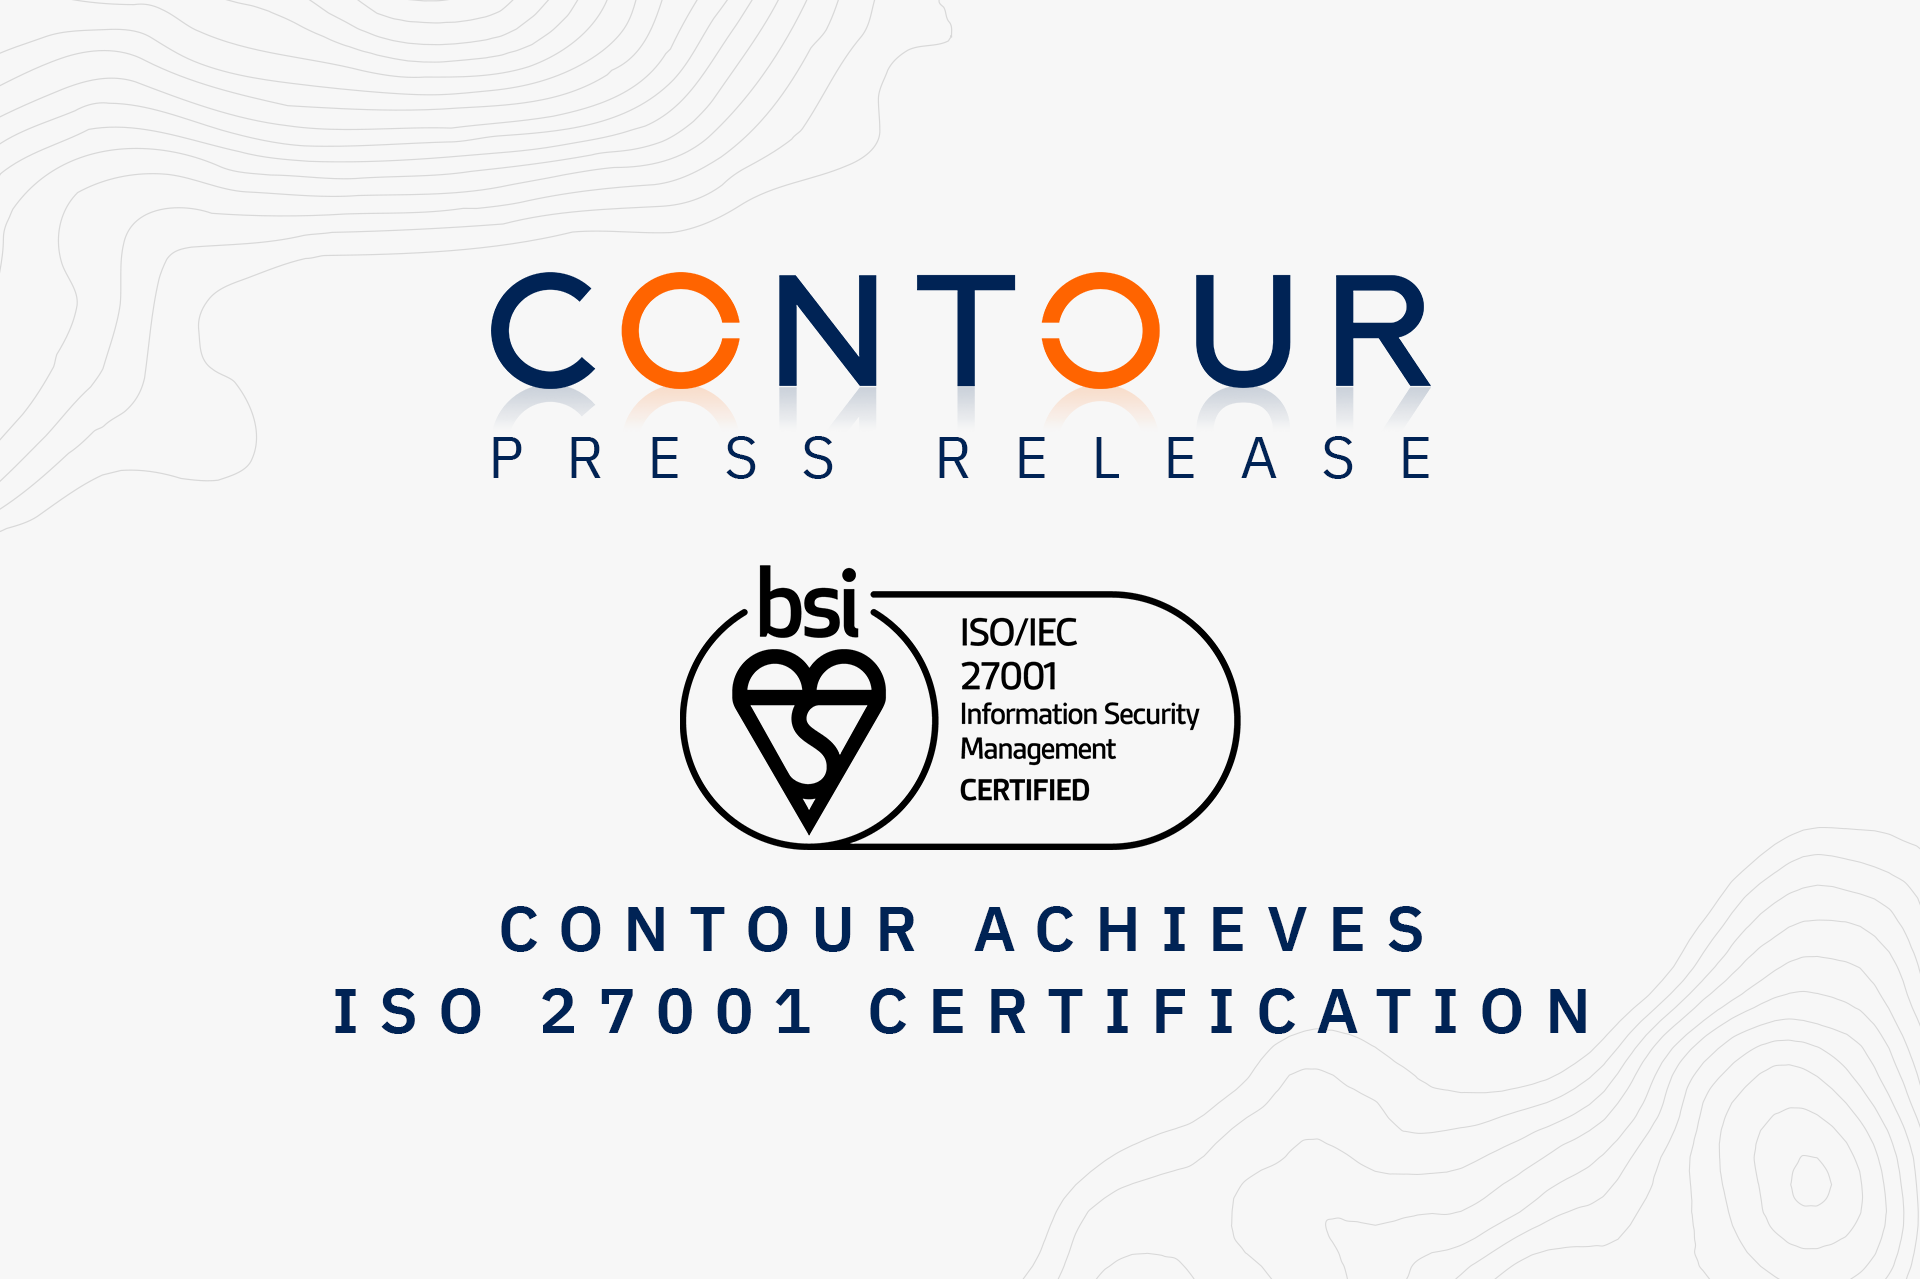 Digital trade finance network Contour achieves ISO 27001 certification